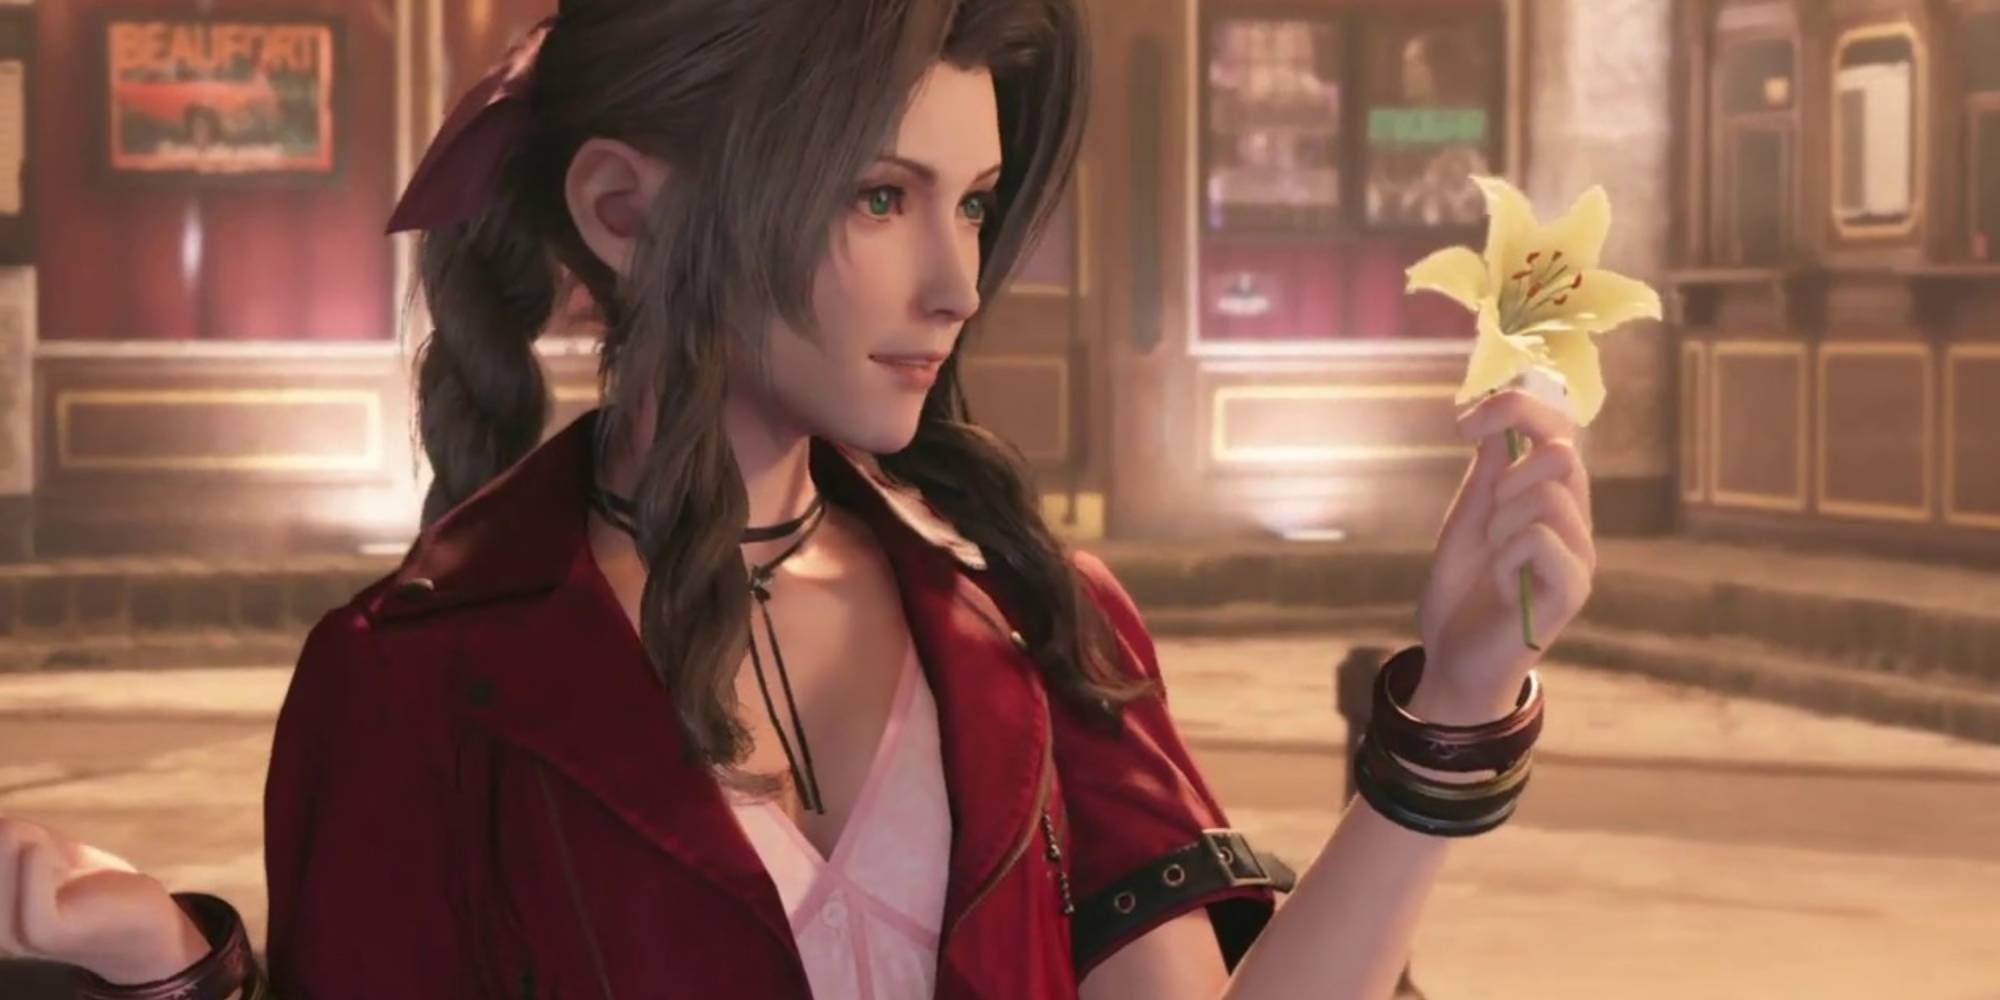 Aerith during her first encounter with Cloud in Final Fantasy 7 Remake